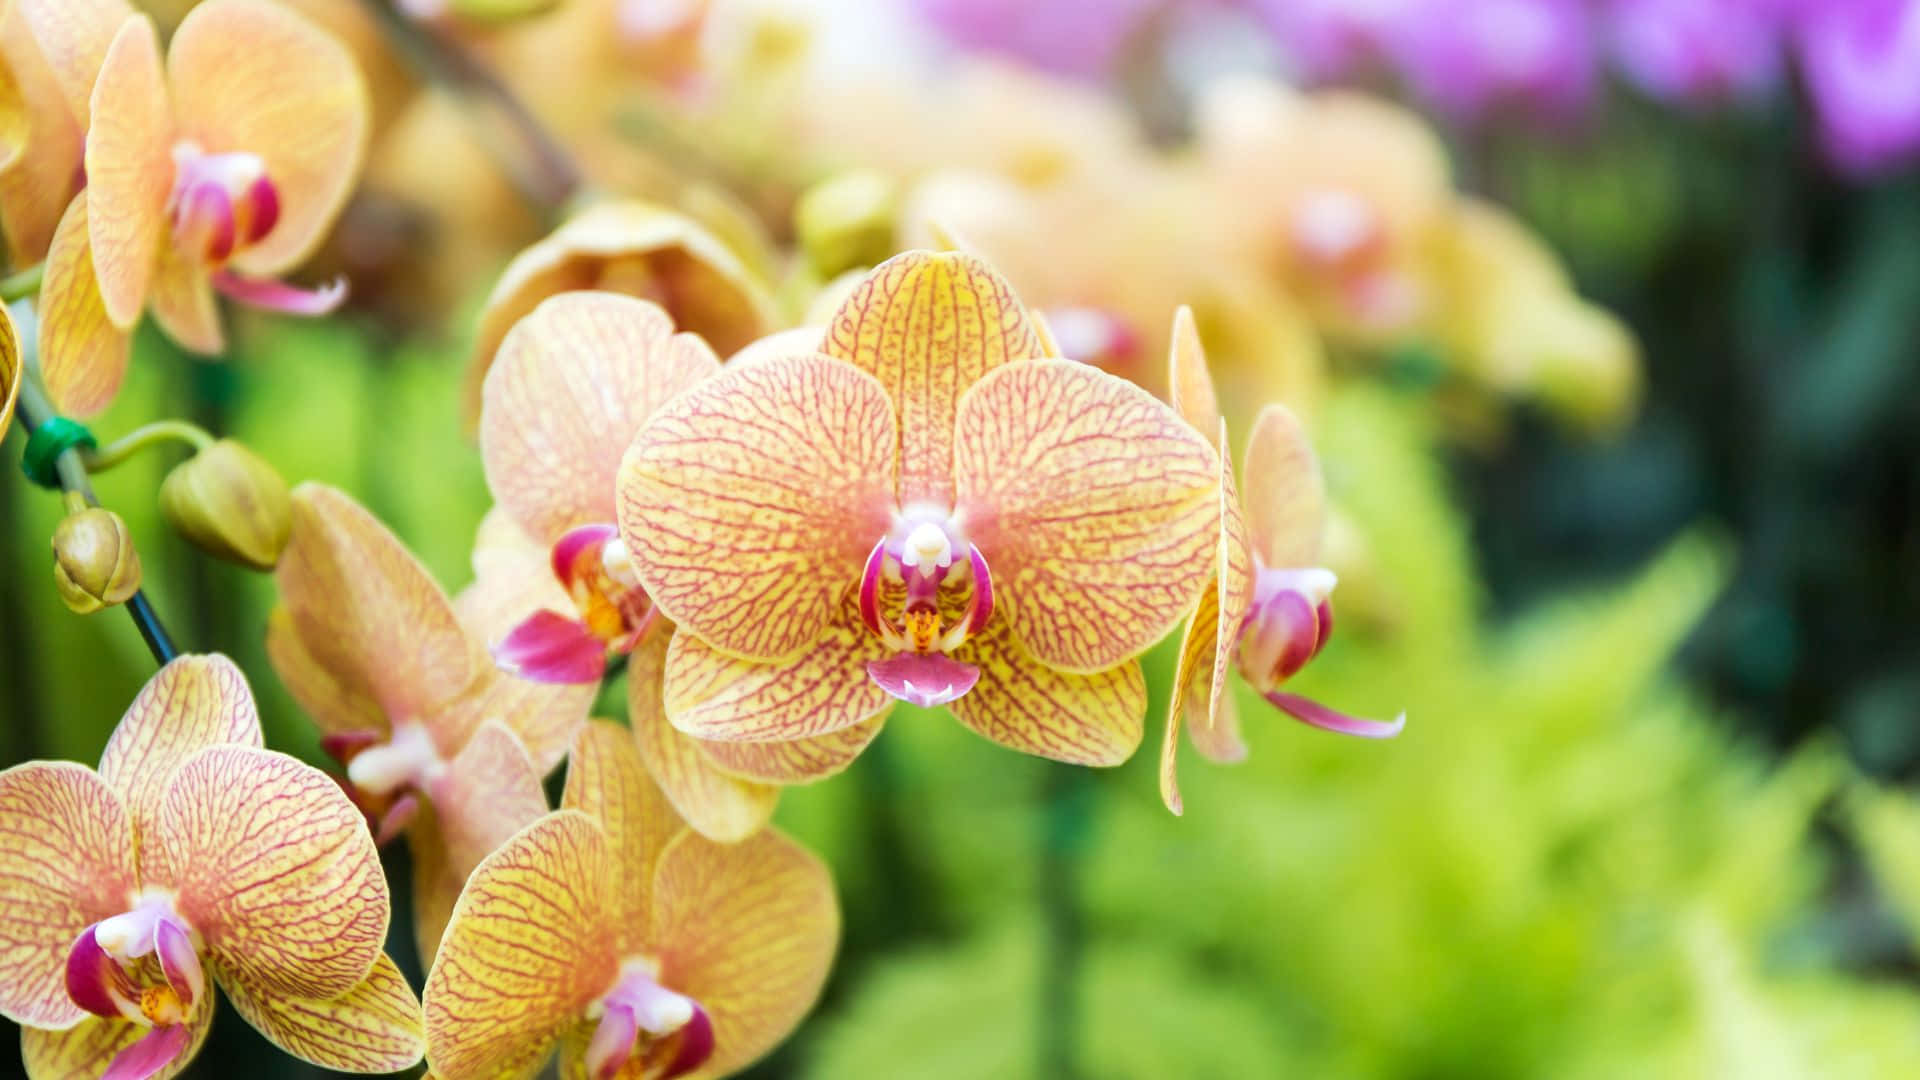 "The Beauty of Orchids"